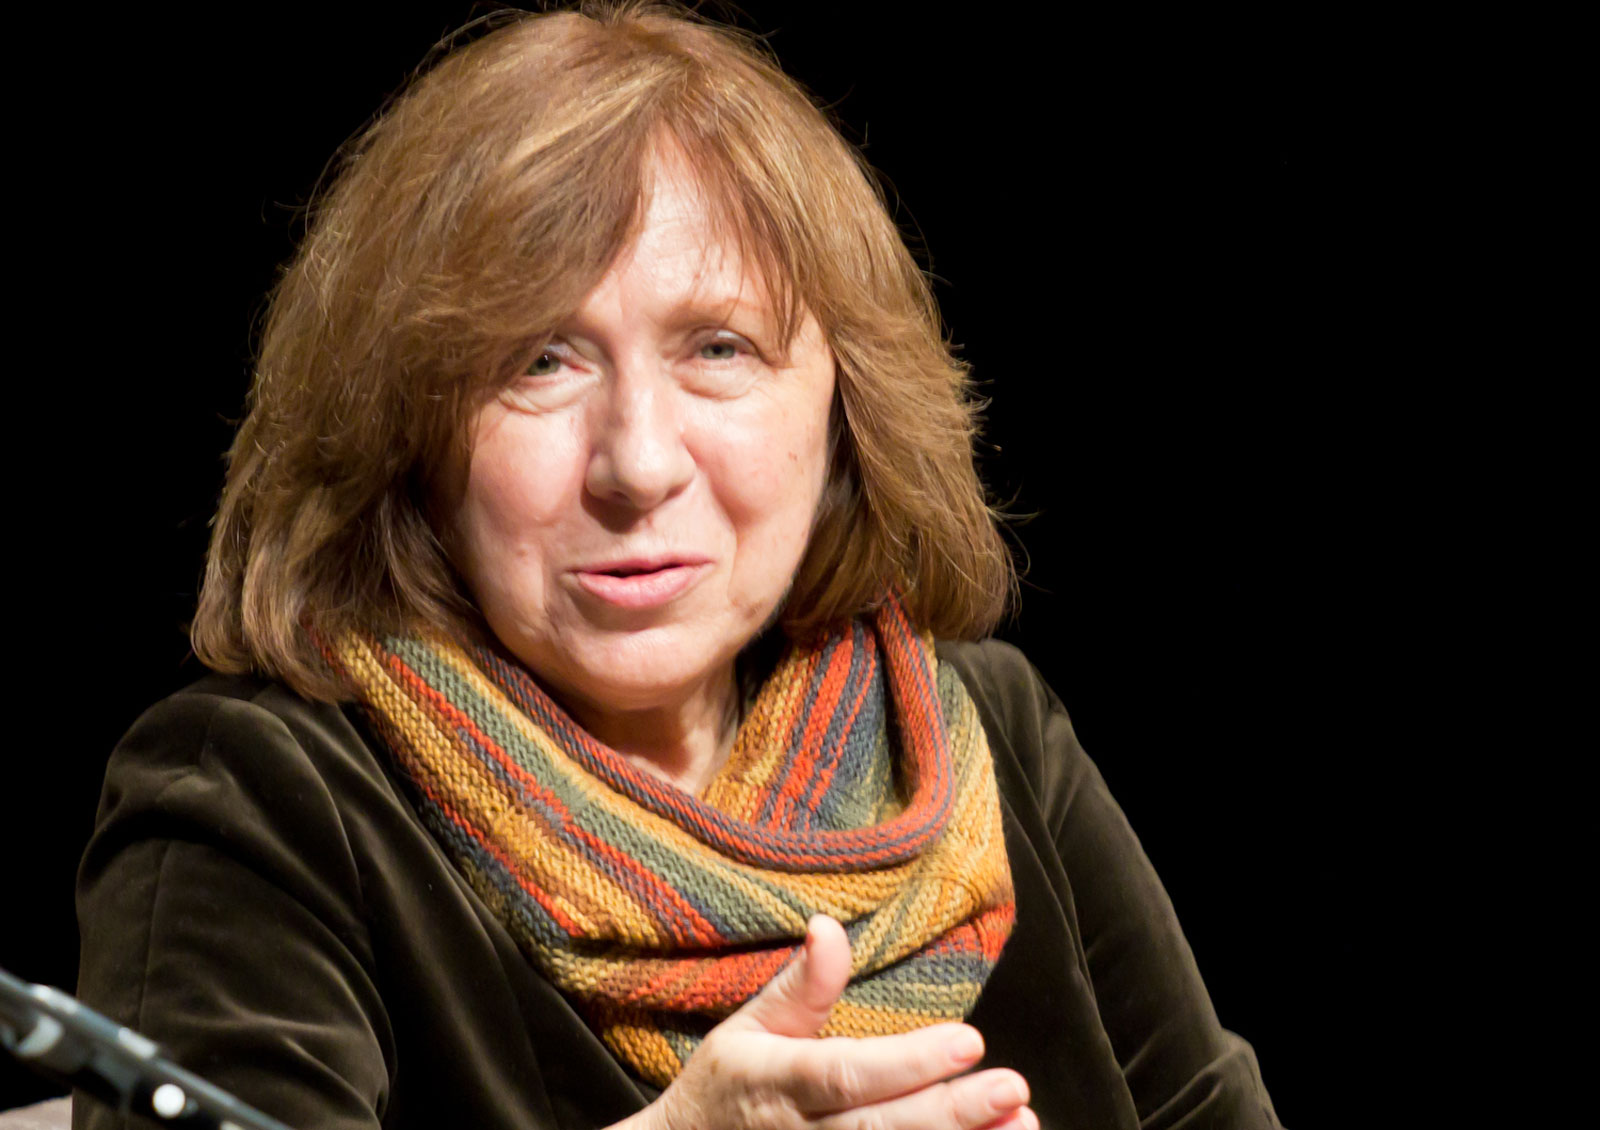 ‘Men are everywhere’: Svetlana Alexievich to launch publishing house for women writers